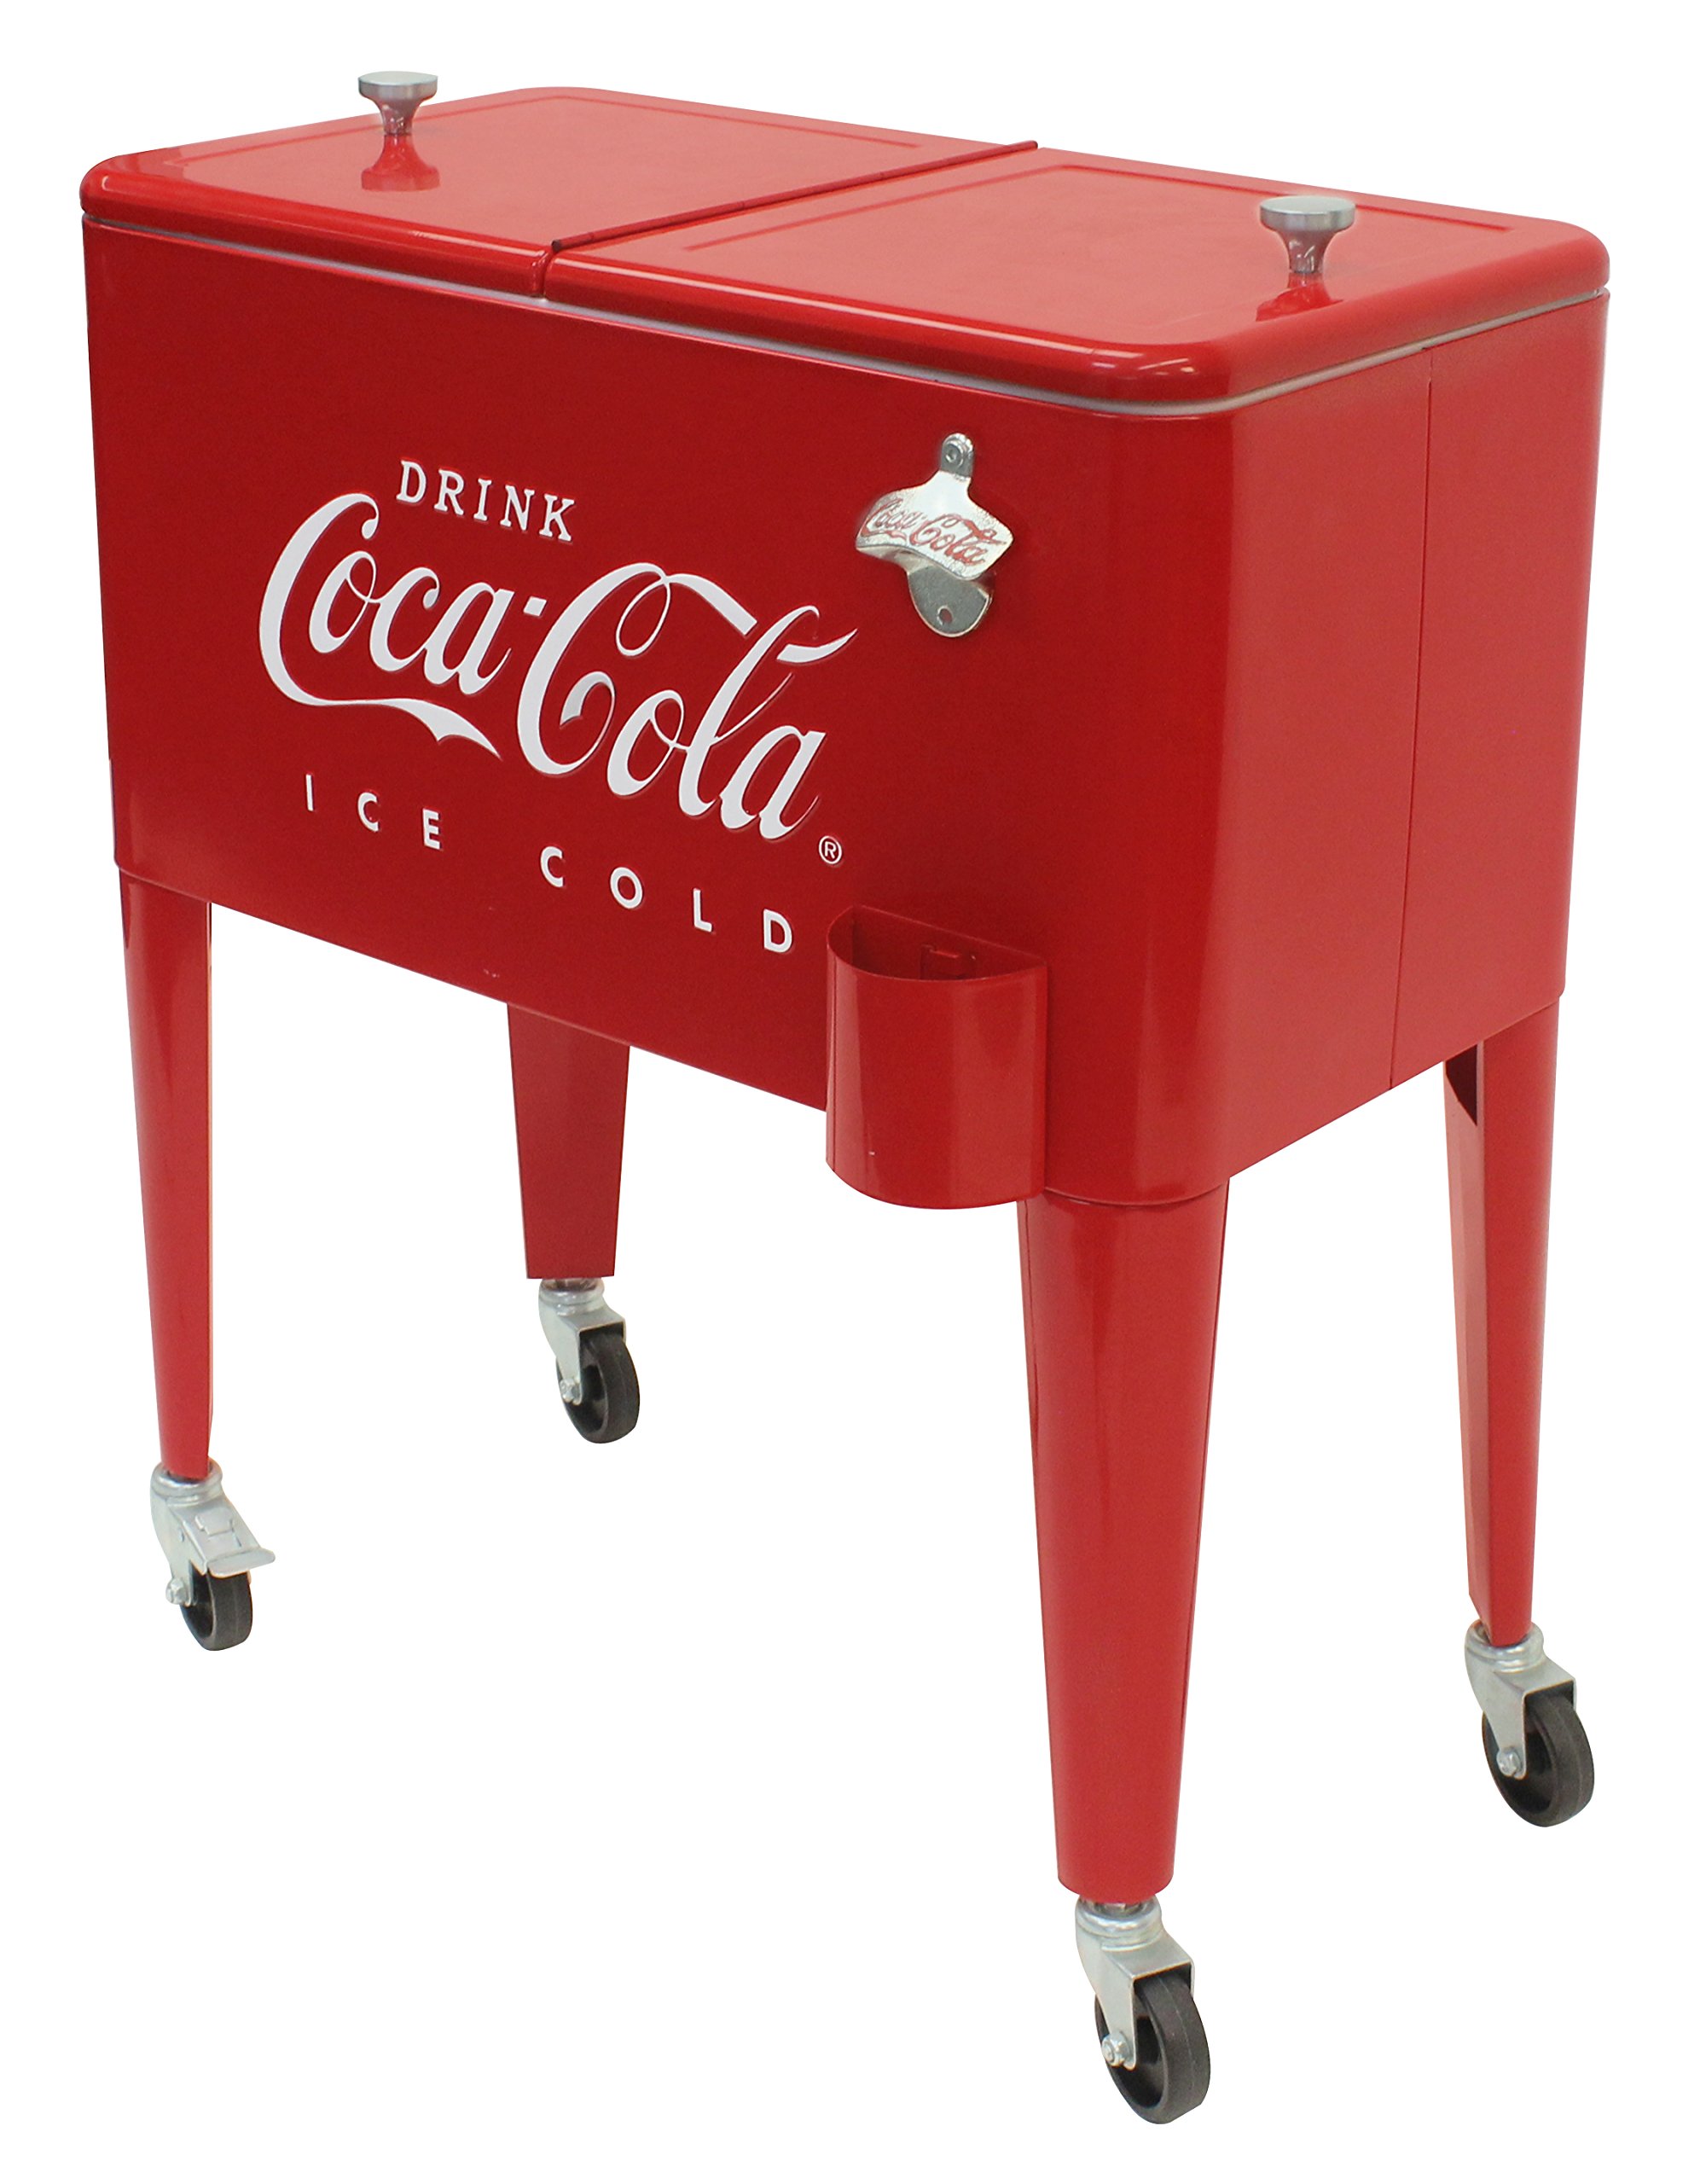 Leigh Country CP 98105 60 Qt Coca-Cola Ice Cold (Embossed) Cooler, Red